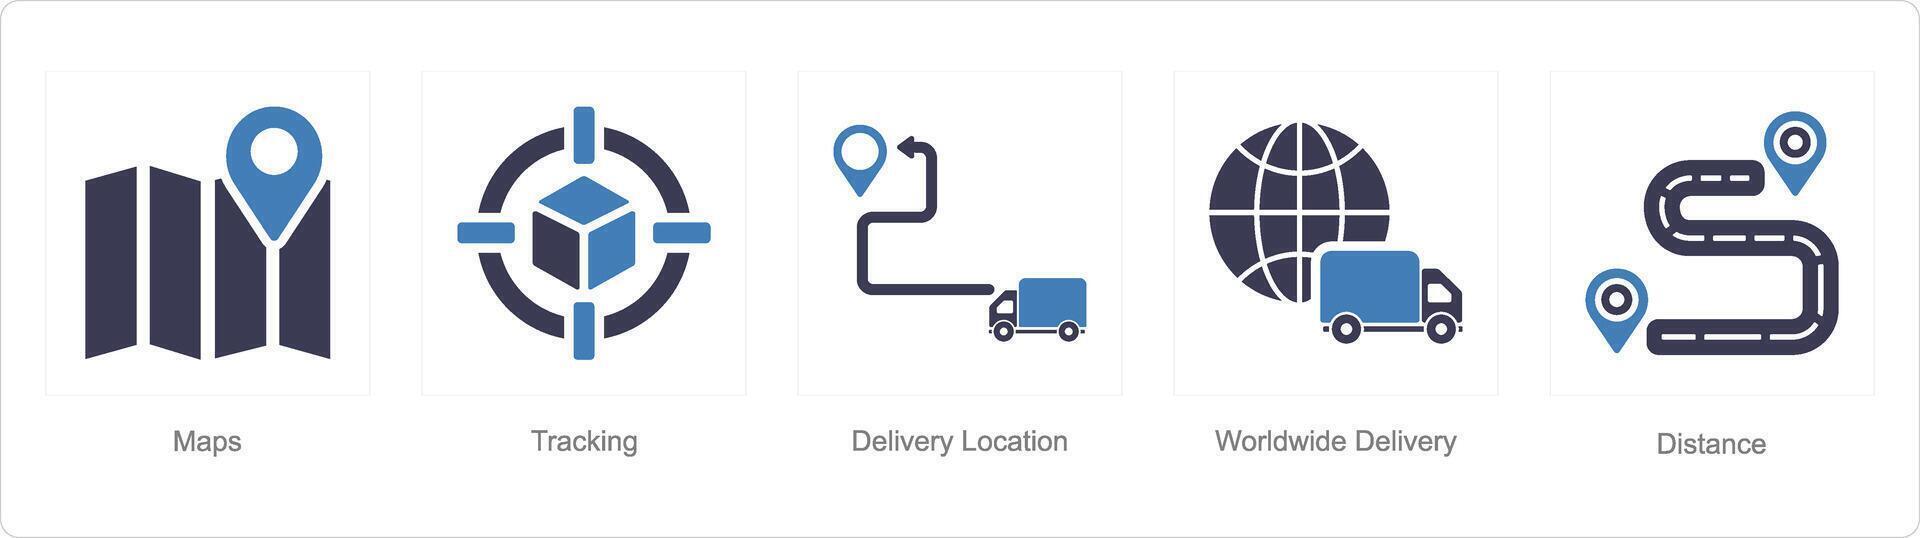 A set of 5 delivery icons as maps, tracking, delivery location vector